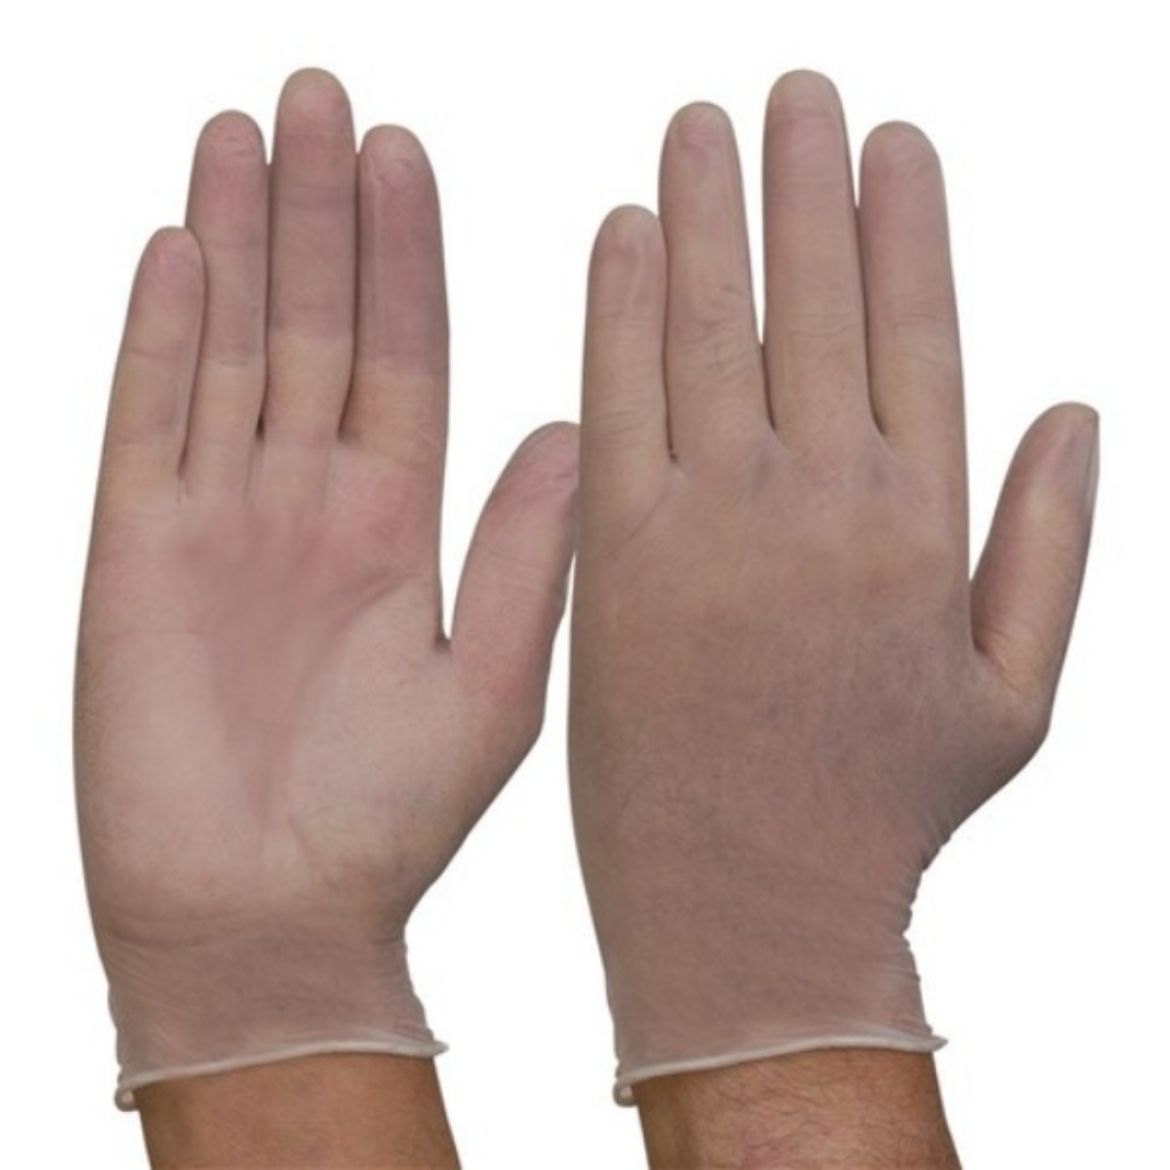 Picture of CLEAR, POWDER FREE GLOVES. AVAILABLE IN SIZES S/M/L/XL